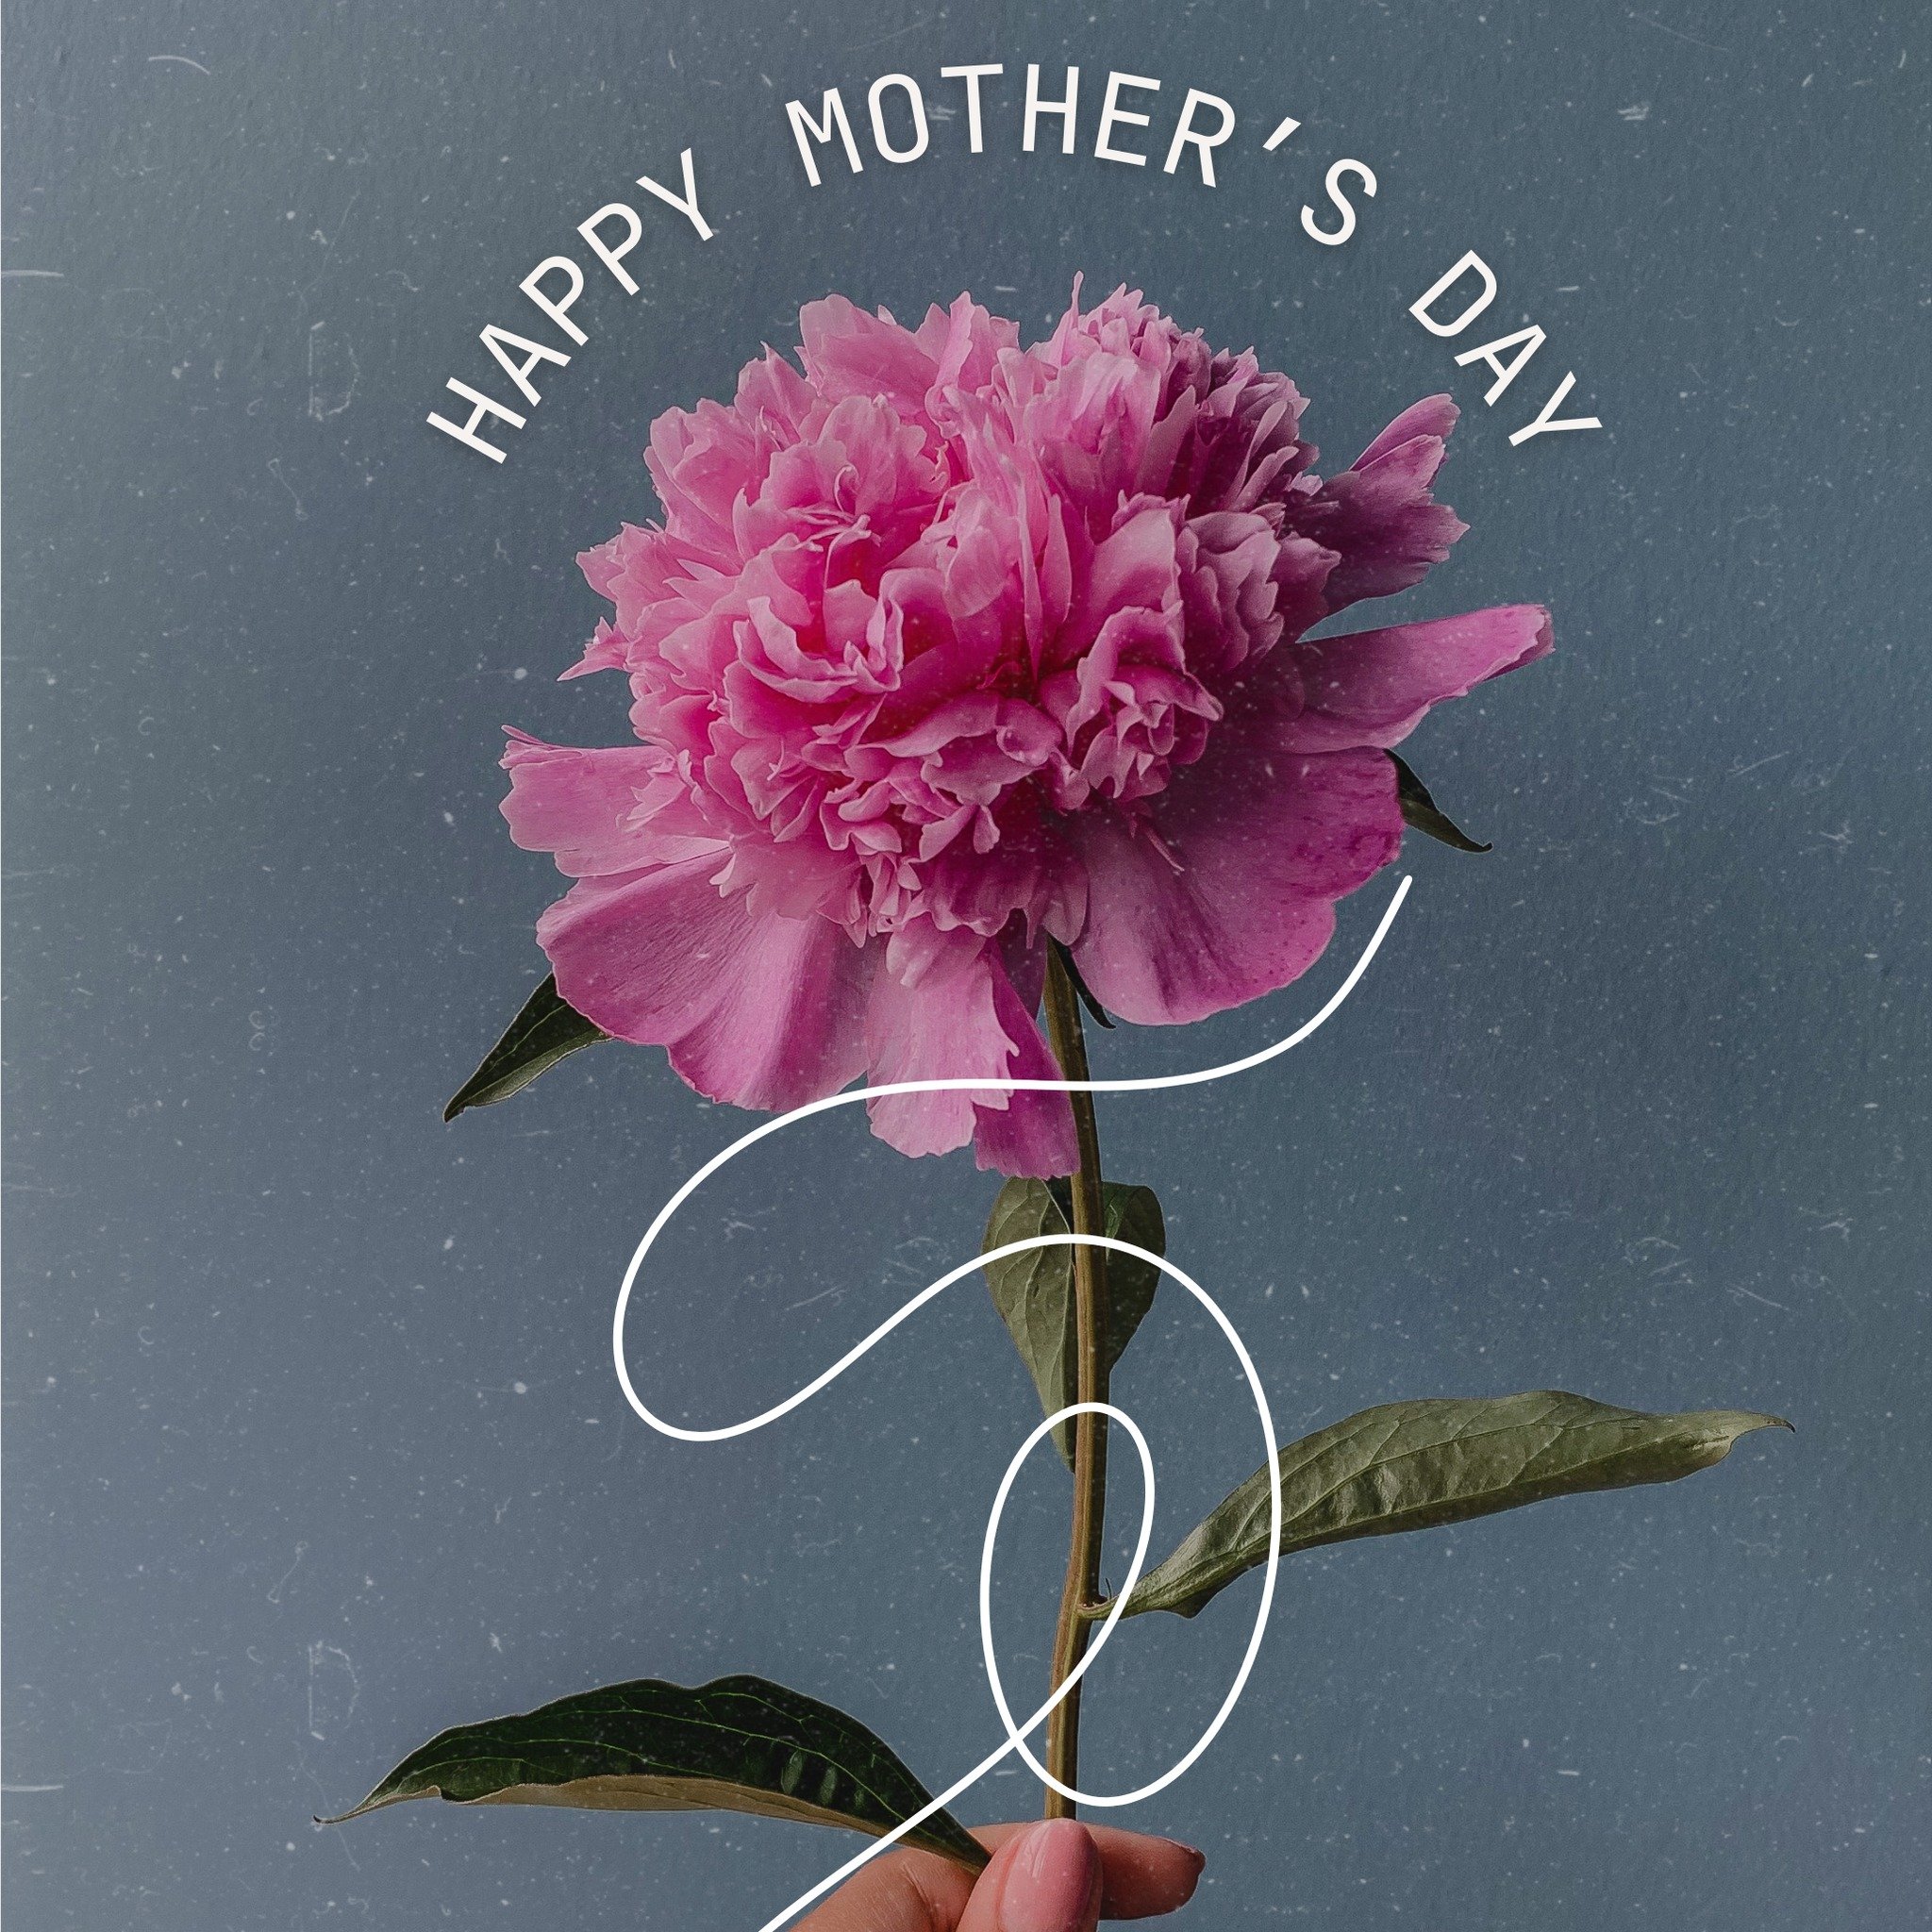 Whether you are a:

❤️ mom
💜step mom
🤍bio mom
❤️foster mom
💜adoptive mom
🤍spiritual mom
❤️or any other mama

Today we honor you and cherish your role in the lives of others. Thank you, Lord, for all of the moms in our lives!